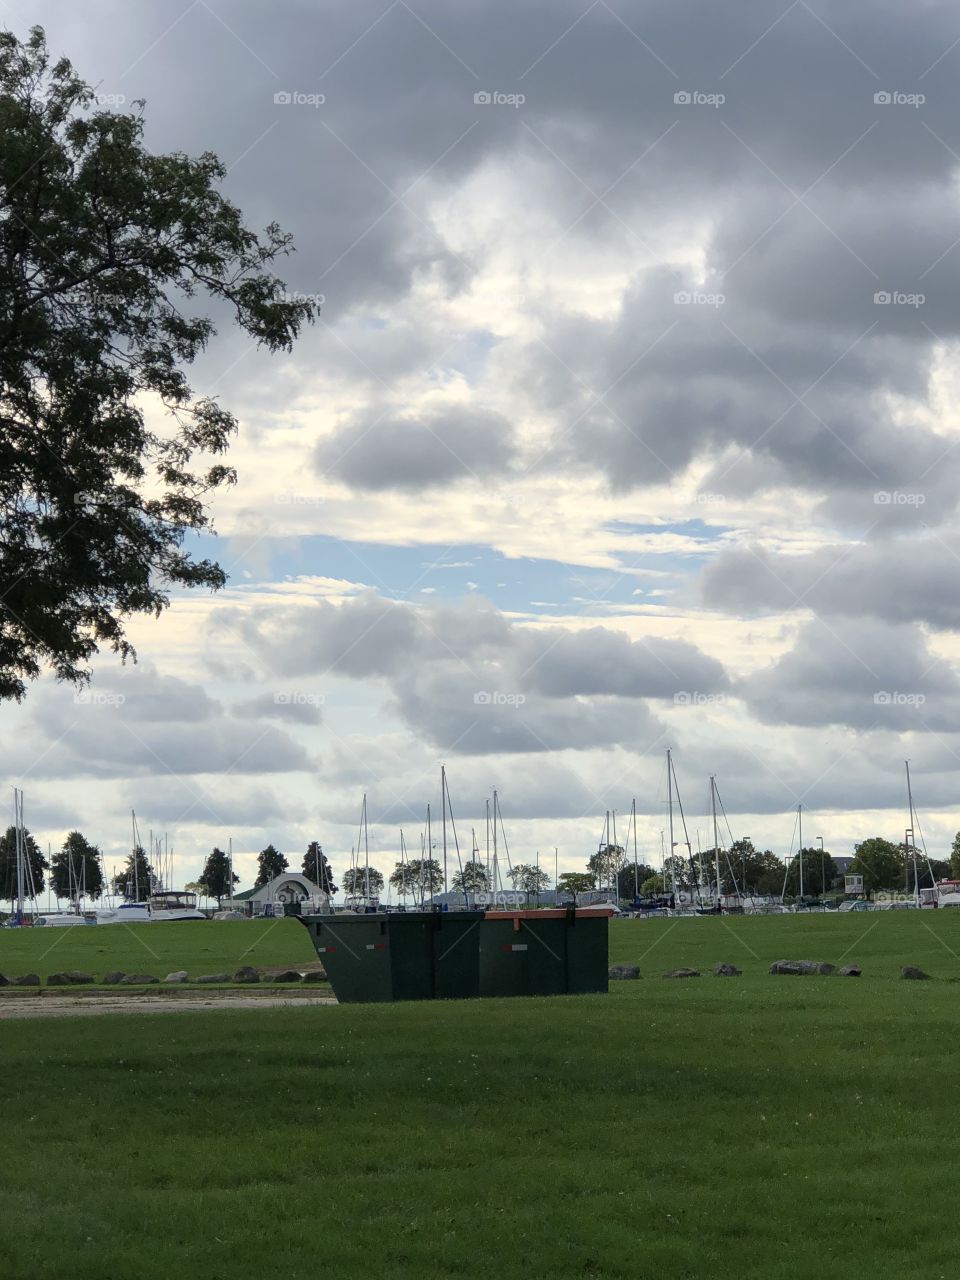 Sky, trees, grass, sailboats and a dumpster....